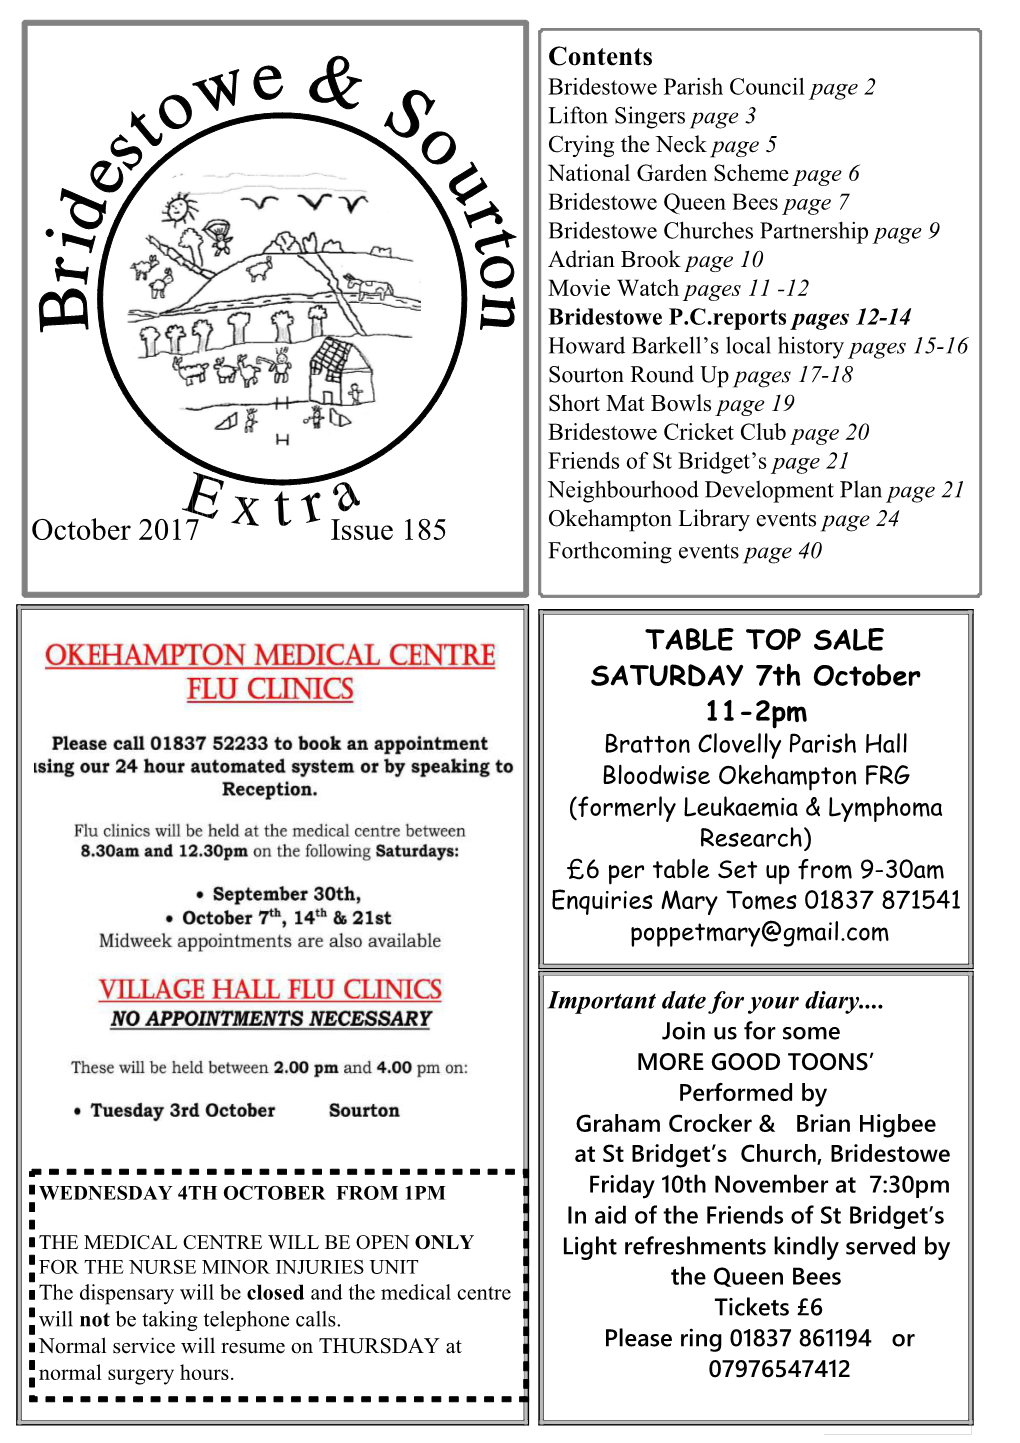 October 2017 Issue 185 Okehampton Library Events Page 24 Forthcoming Events Page 40